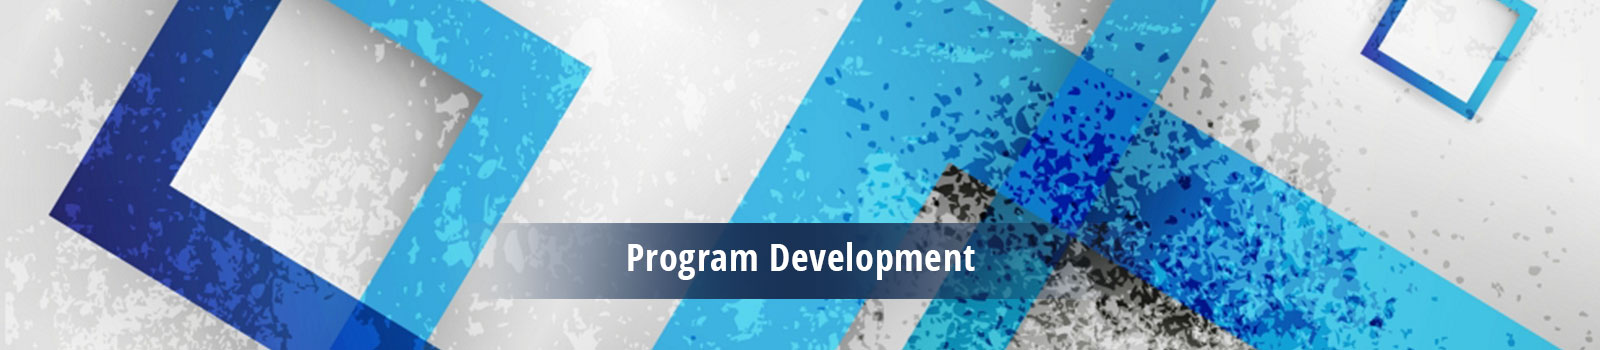 Cybersecurity Program Development; Cybersecurity Privacy Management; Vulnerability Management